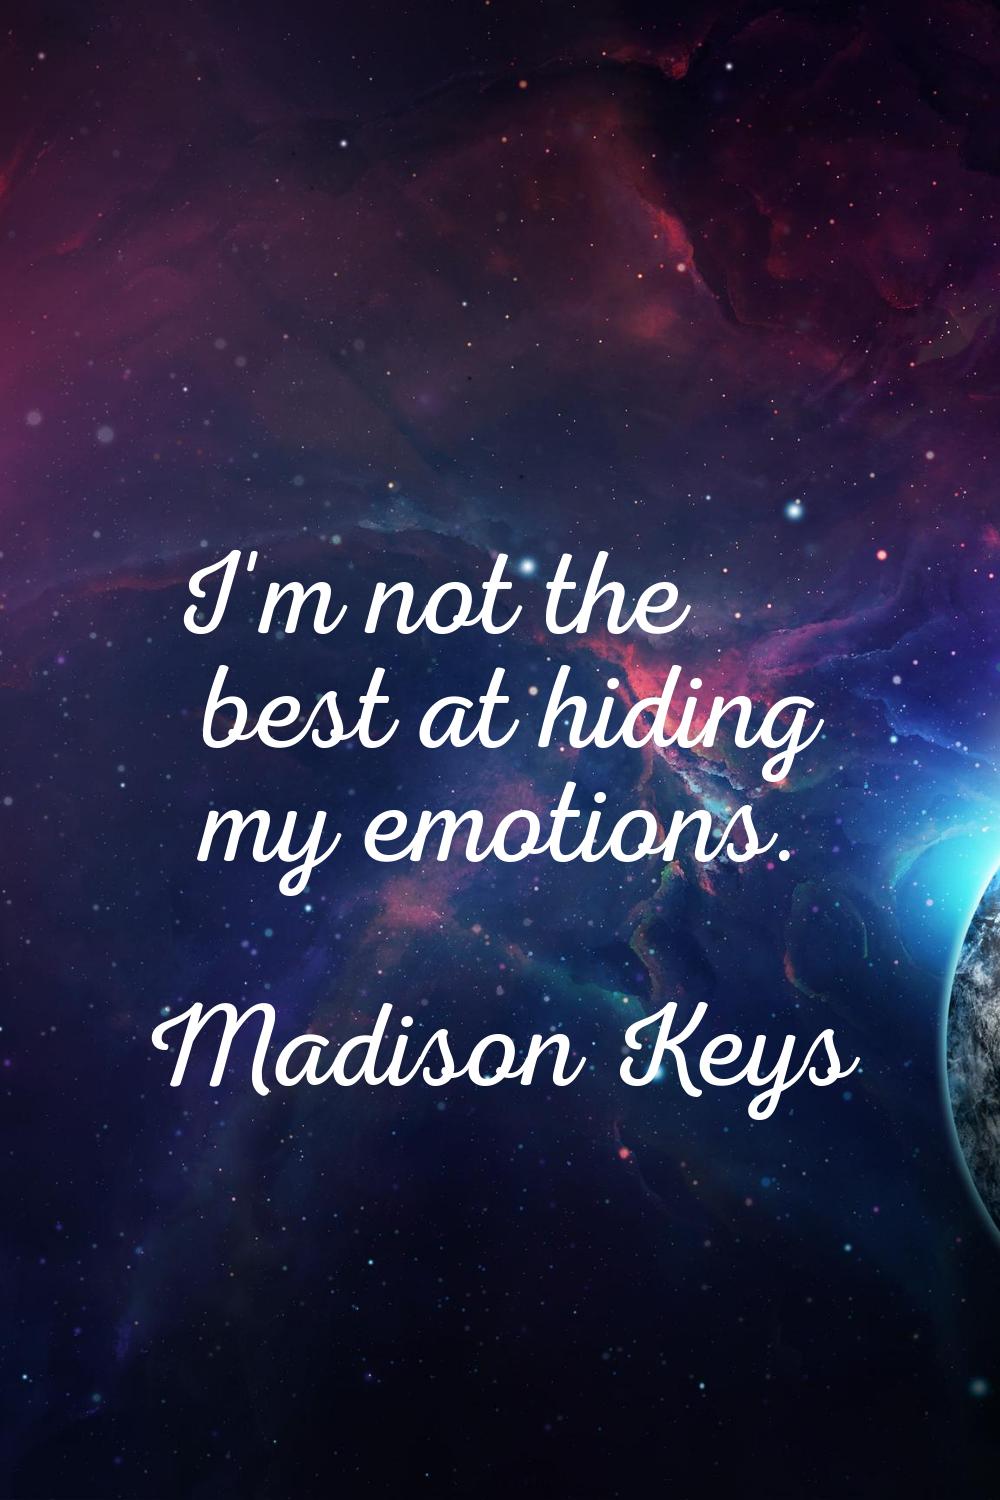 I'm not the best at hiding my emotions.